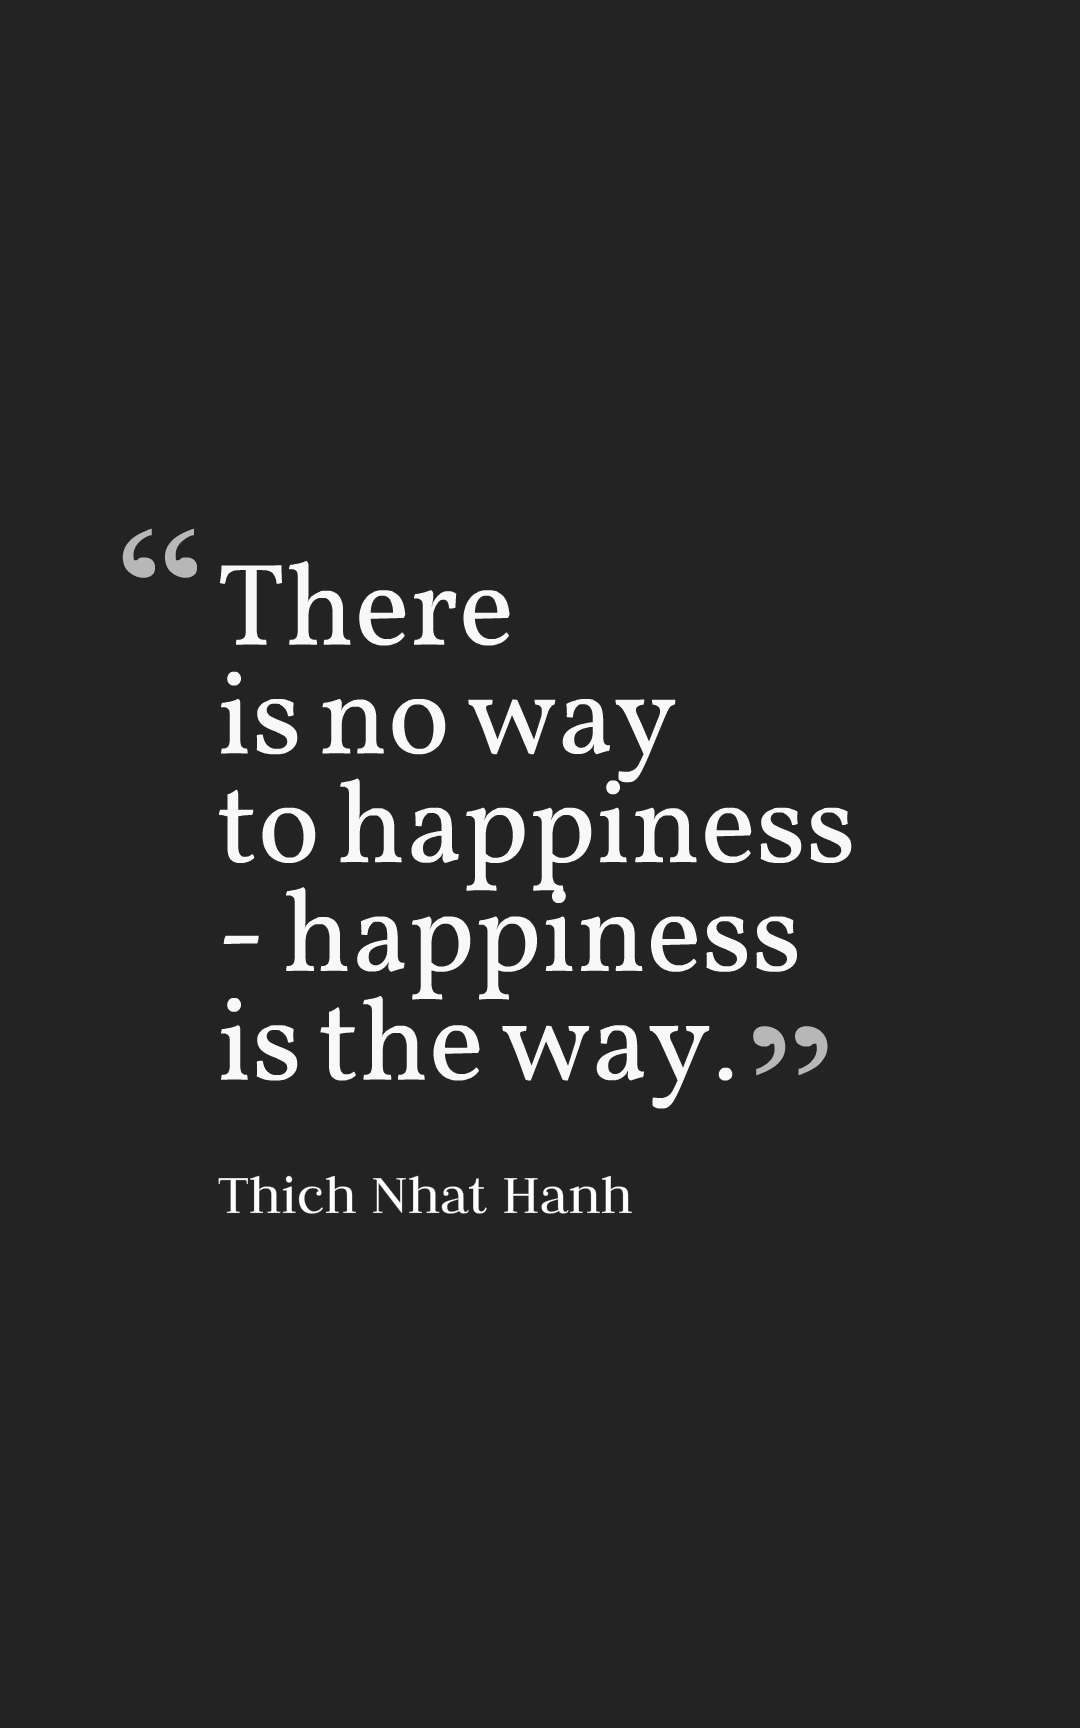 There is no way to happiness - happiness is the way.